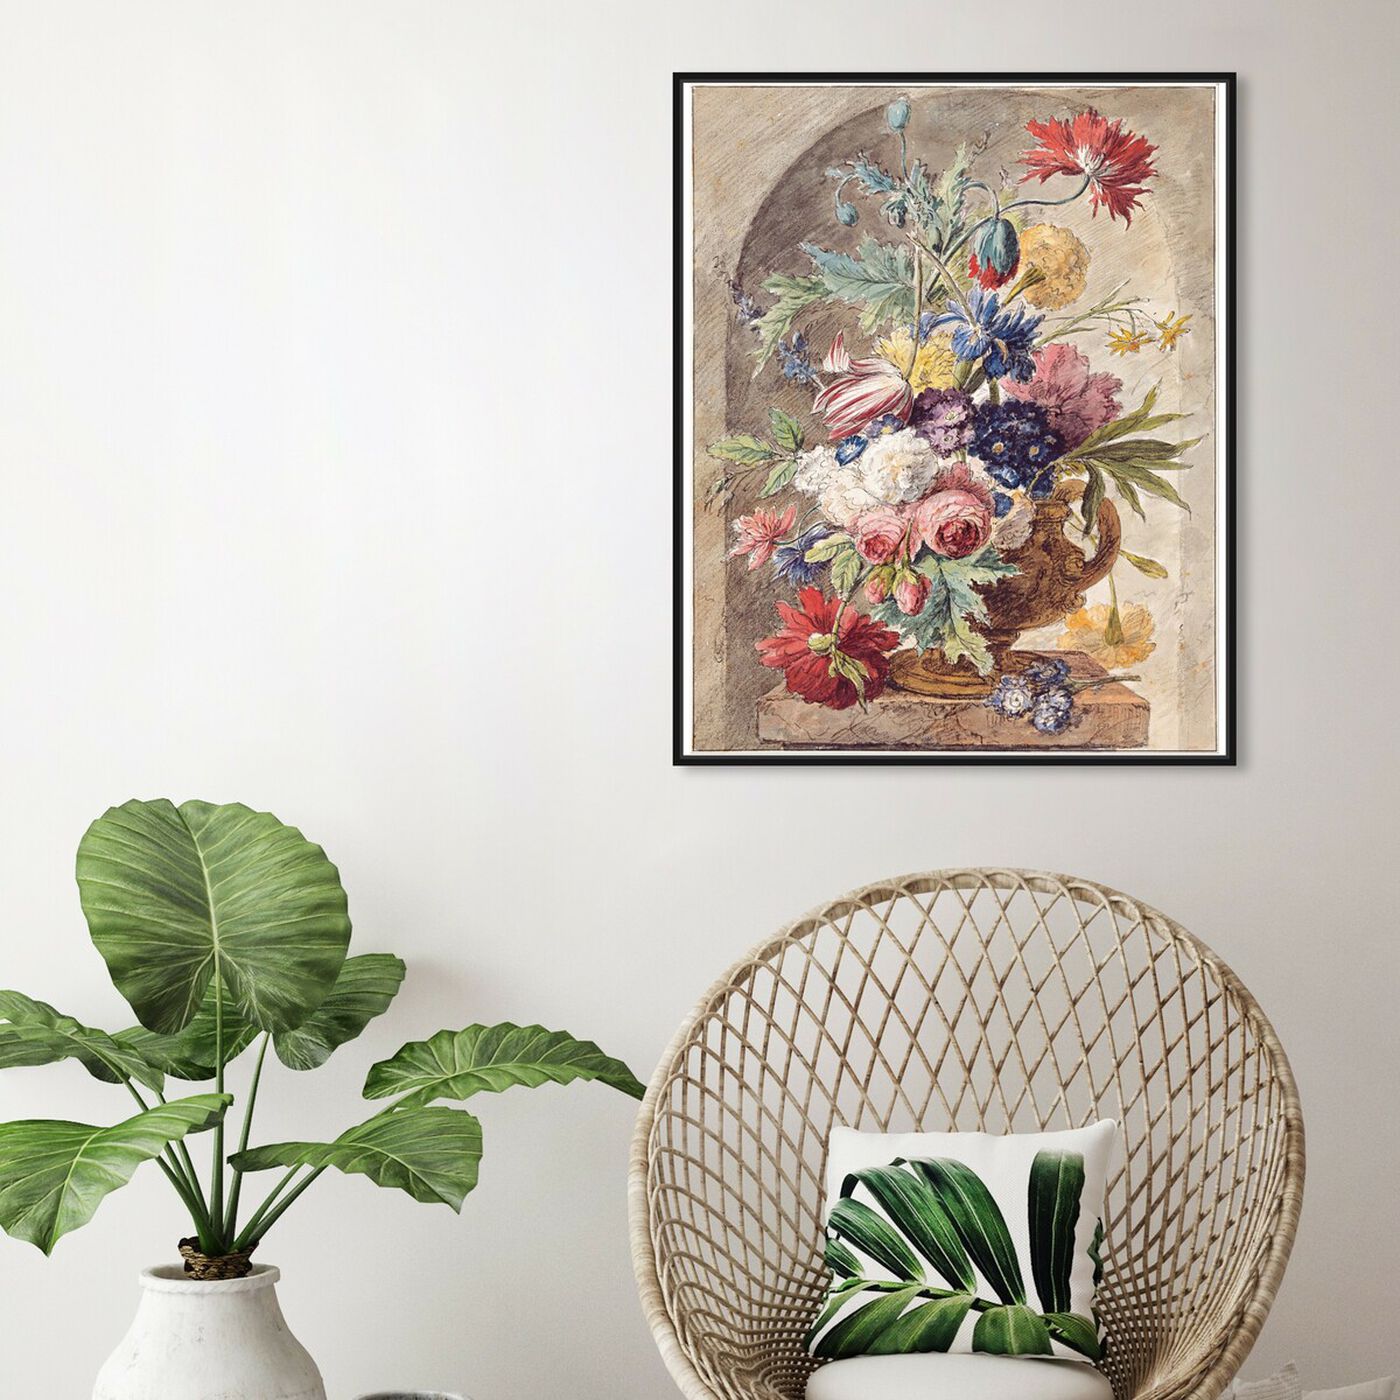 Hanging view of Huysum - Flower Still Life featuring classic and figurative and renaissance art.